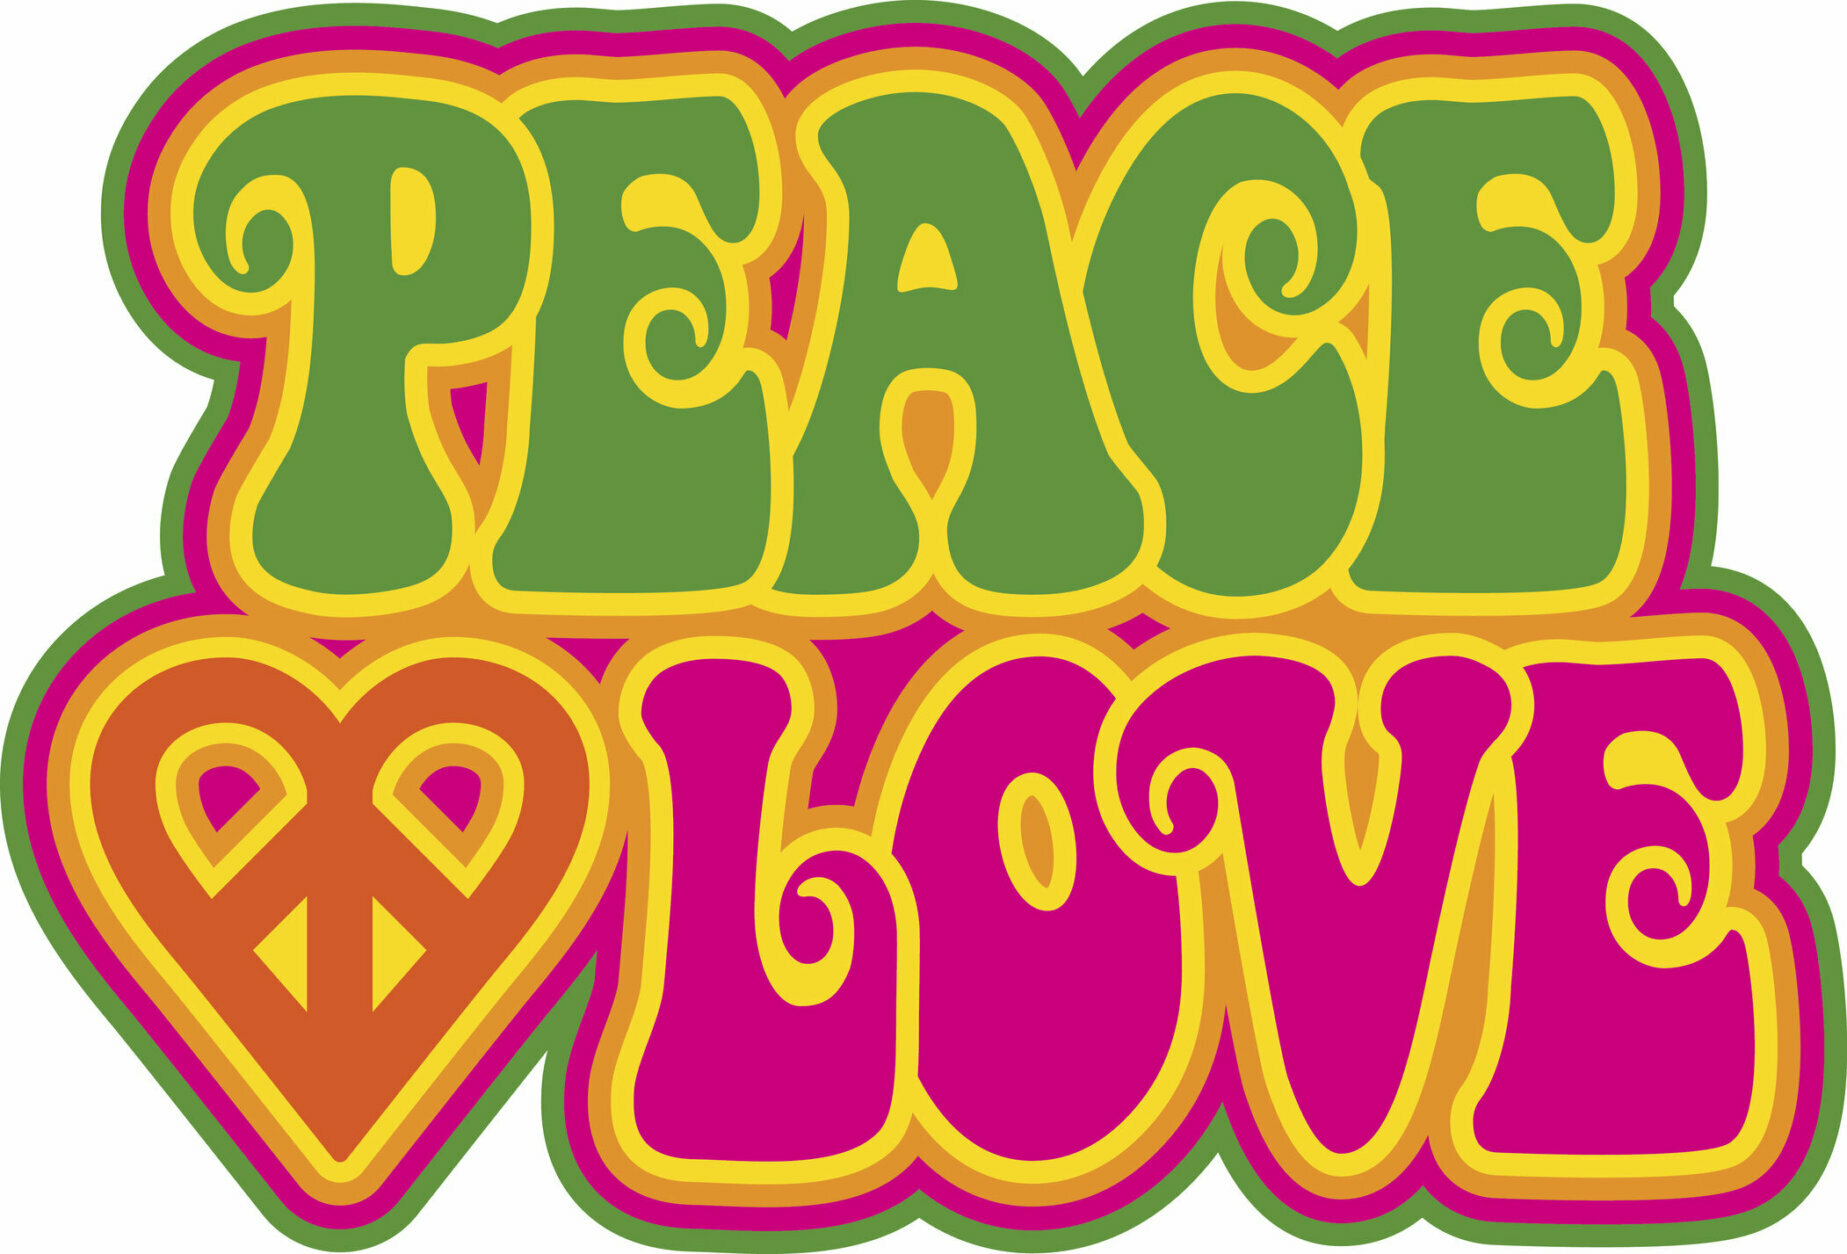 Peace and Love retro-styled outlined text design with a peace-heart symbol in green, magenta, orange and yellow. Type style is my own design.